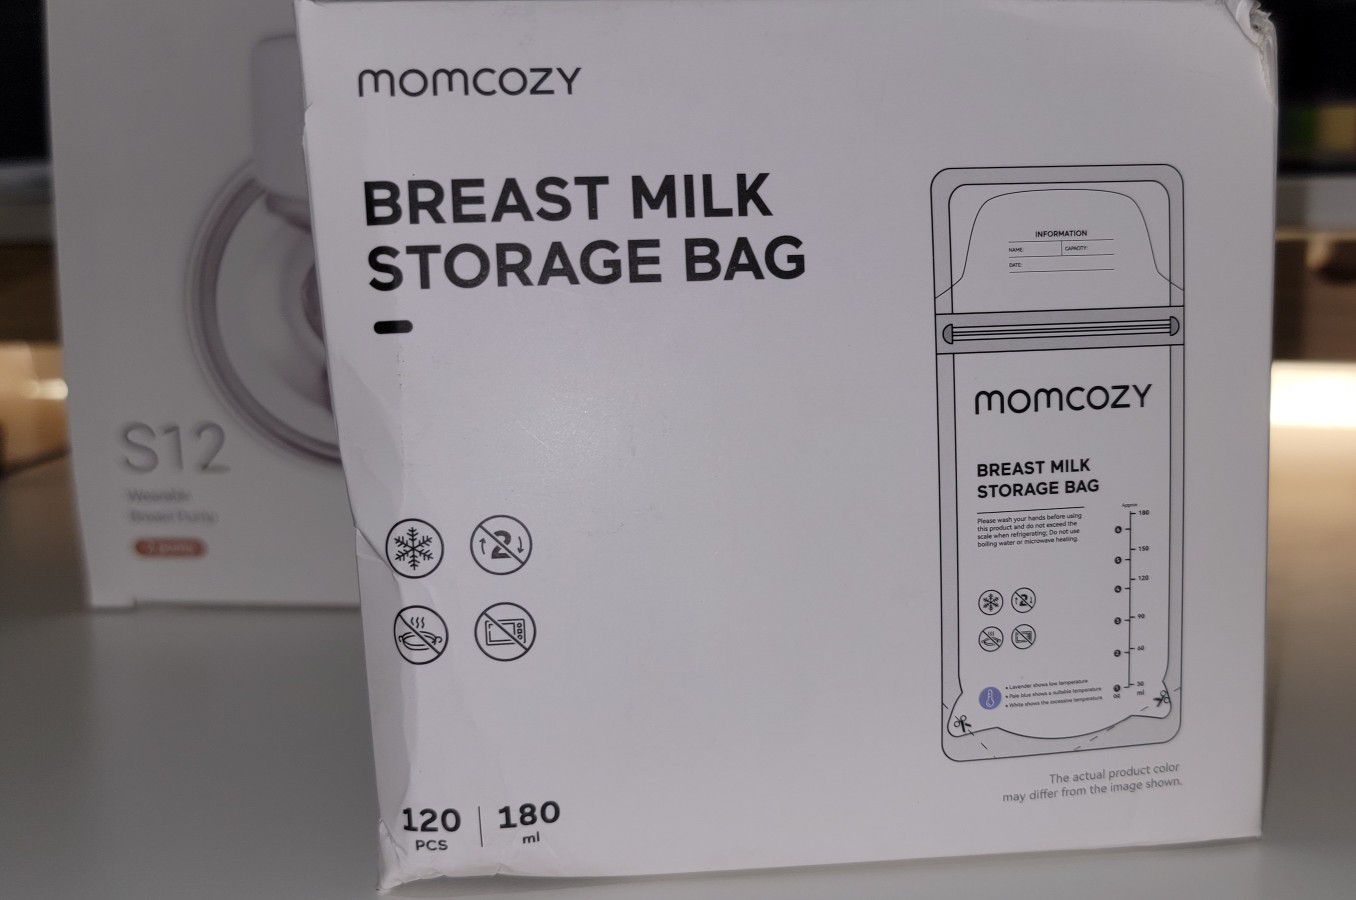 S12 Double Wearable Pump and 120 Count Breastmilk Storage Bags